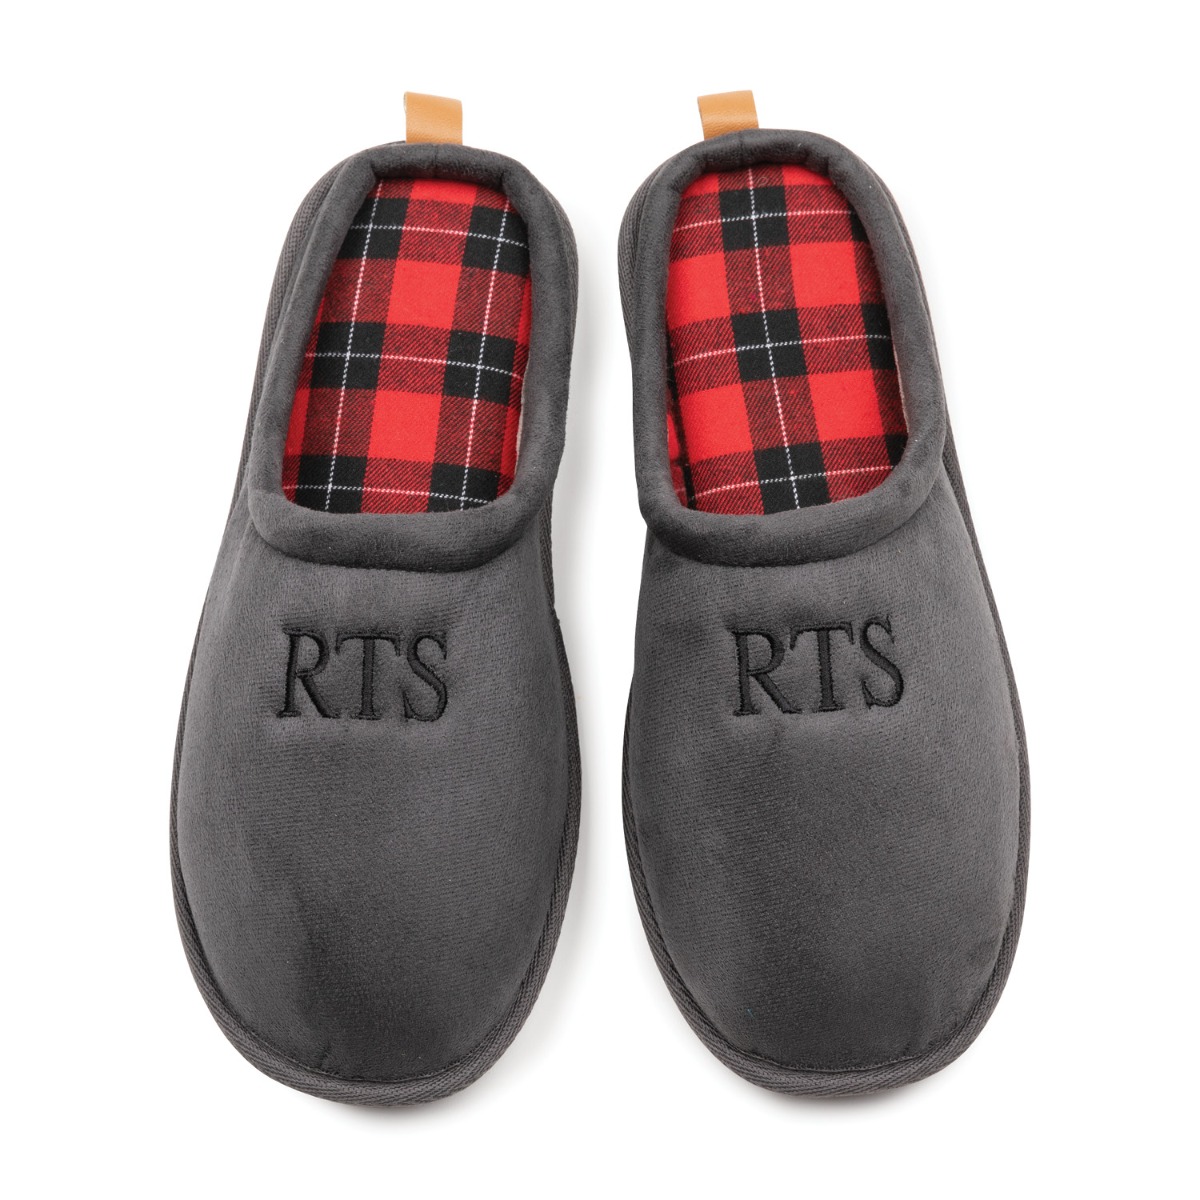 Personalized Men's Gray Clog Slippers---Extra Large